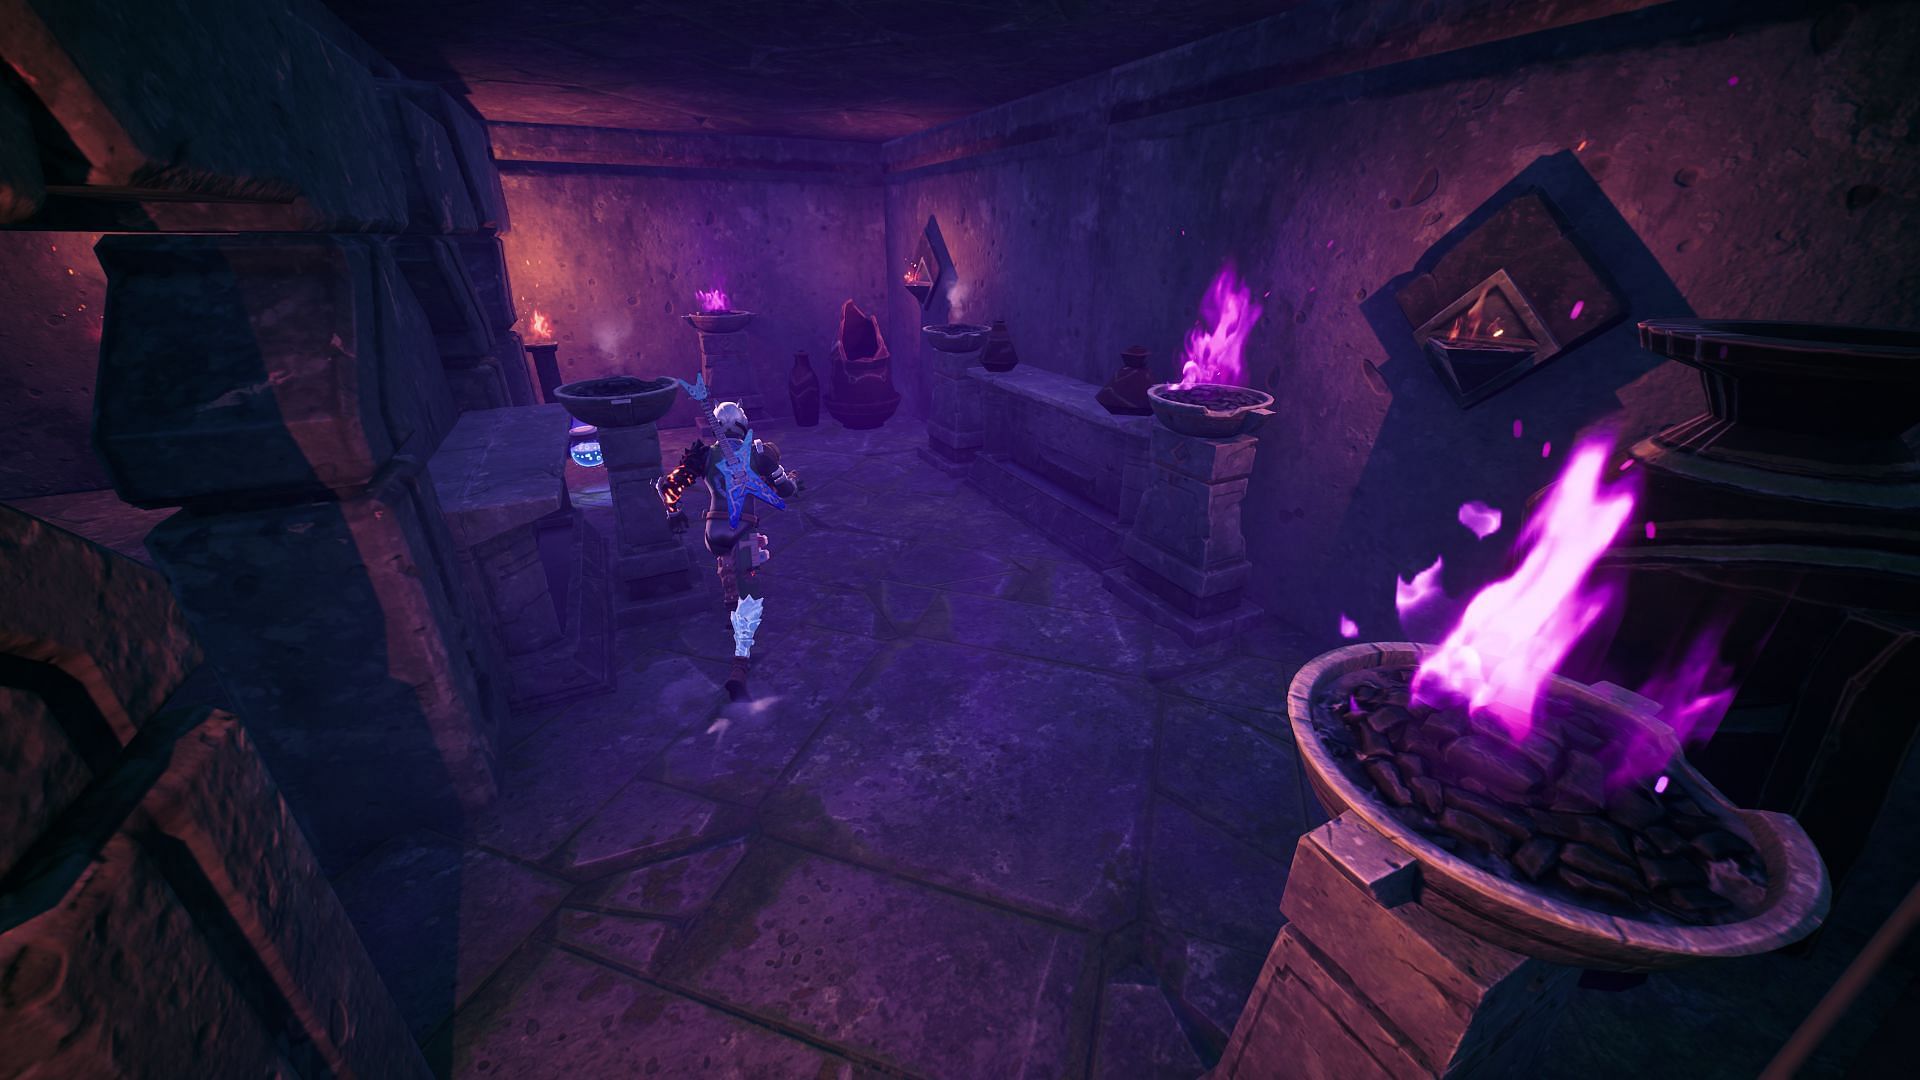 Copy the pattern of the Braziers in the room below and match them with the ones outside the chamber above (Image via Epic Games/Fortnite)